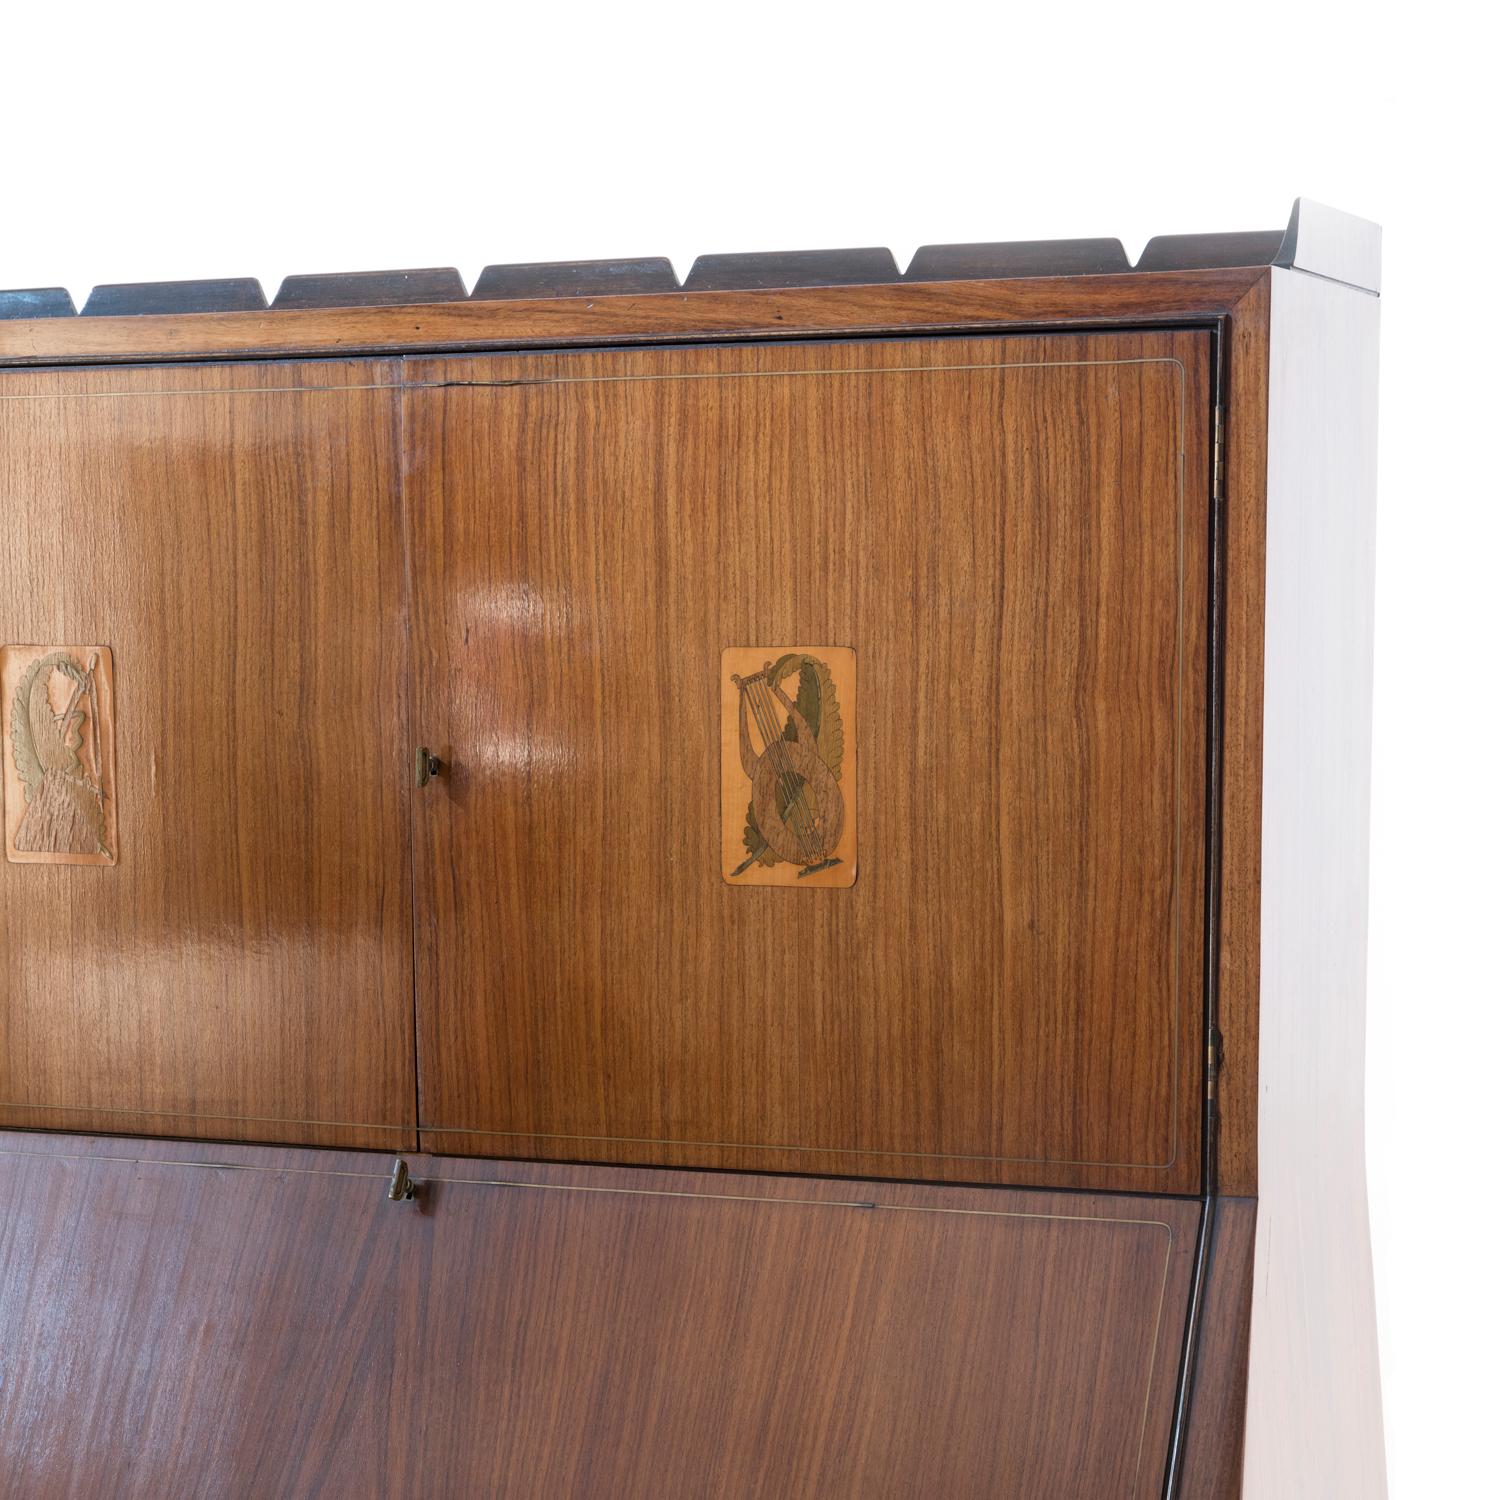 1950 Cabinet/Secrétaire by Giovanni Gariboldi for Colli, Bubinga and Inlay Work 2